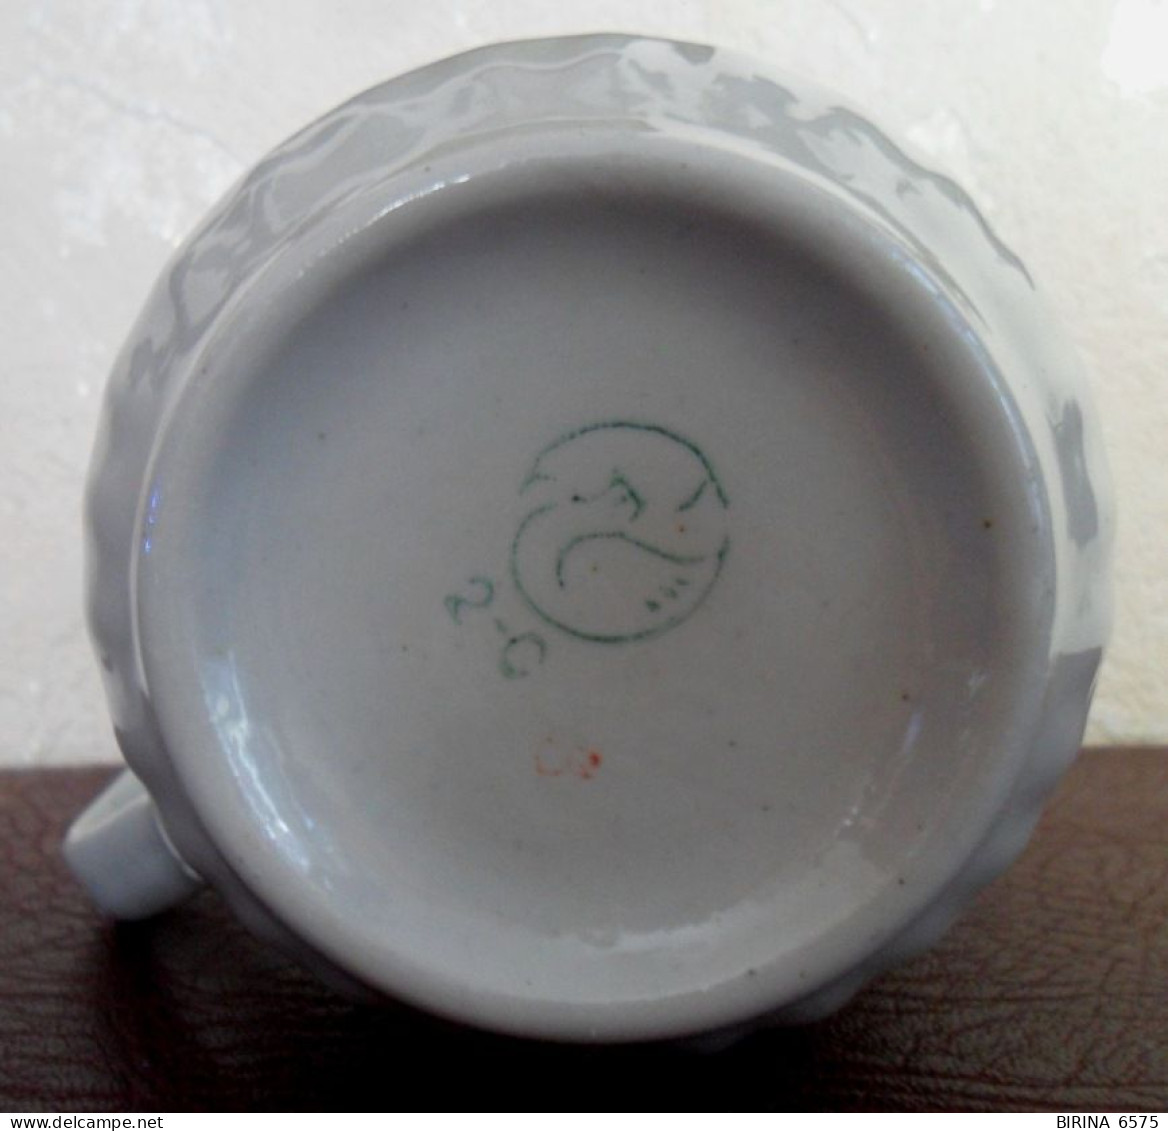 A Cup. Cup. CHILDREN'S WINTER FUN. TERNOPIL PORCELAIN FACTORY. USSR. - 8-49-i - Tasses